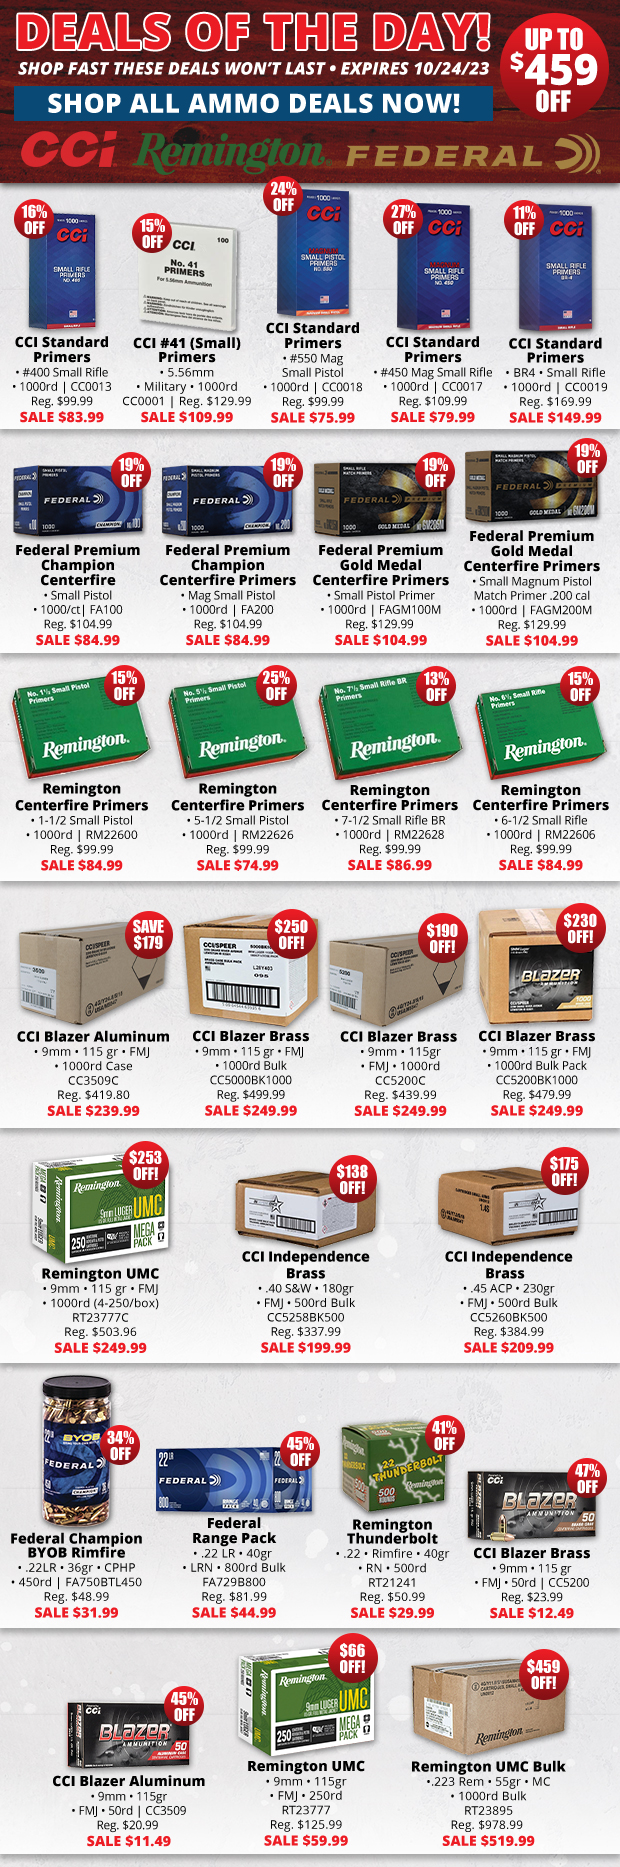 Up to $459 Off Ammo!